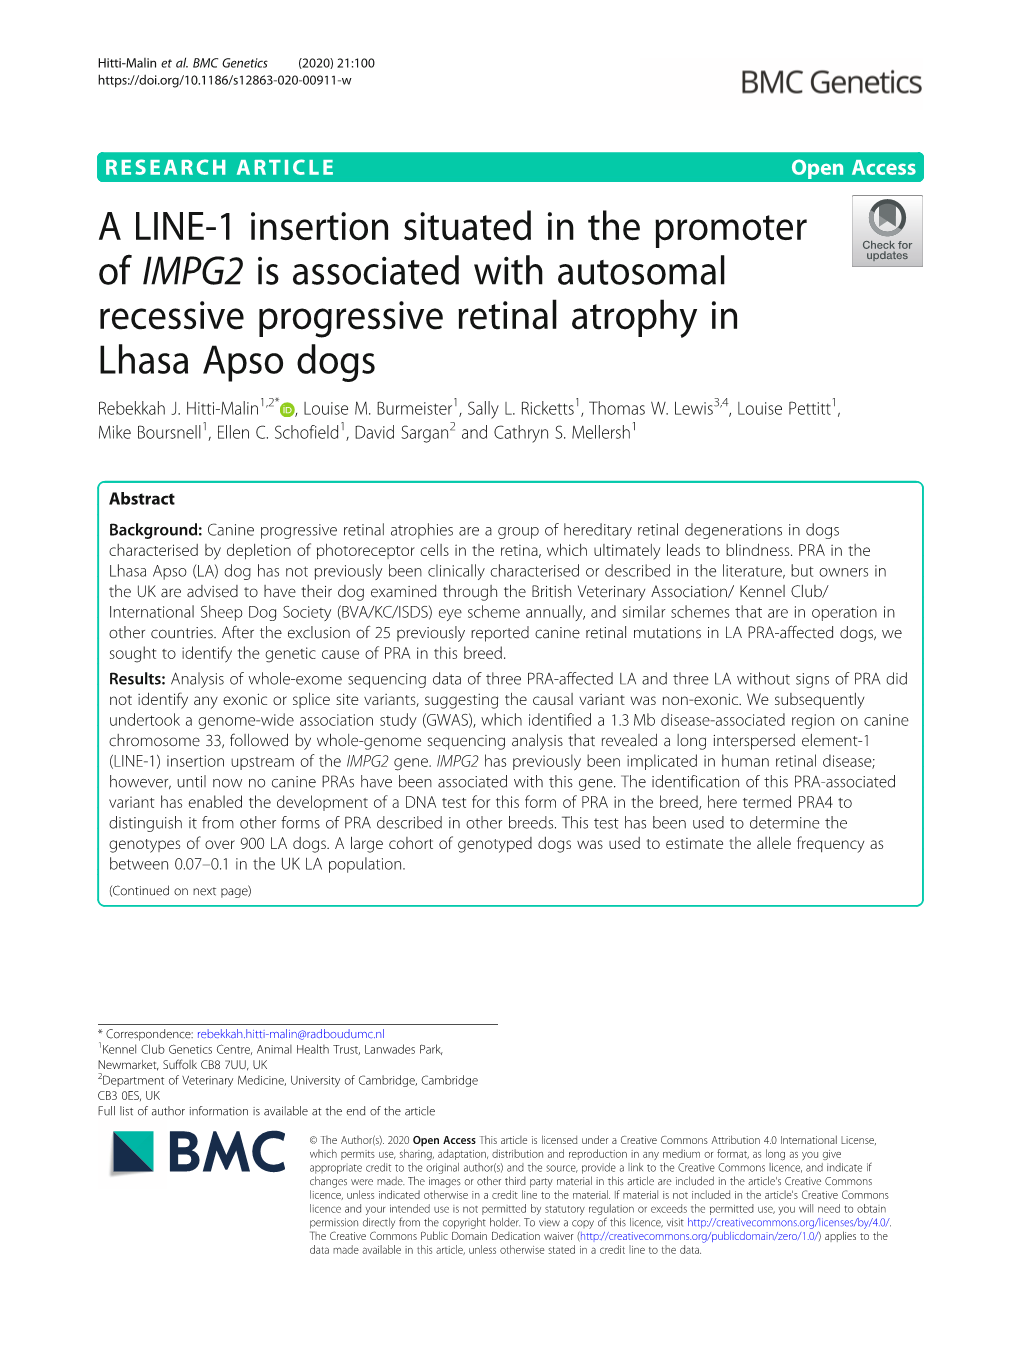 A LINE-1 Insertion Situated in the Promoter of IMPG2 Is Associated with Autosomal Recessive Progressive Retinal Atrophy in Lhasa Apso Dogs Rebekkah J